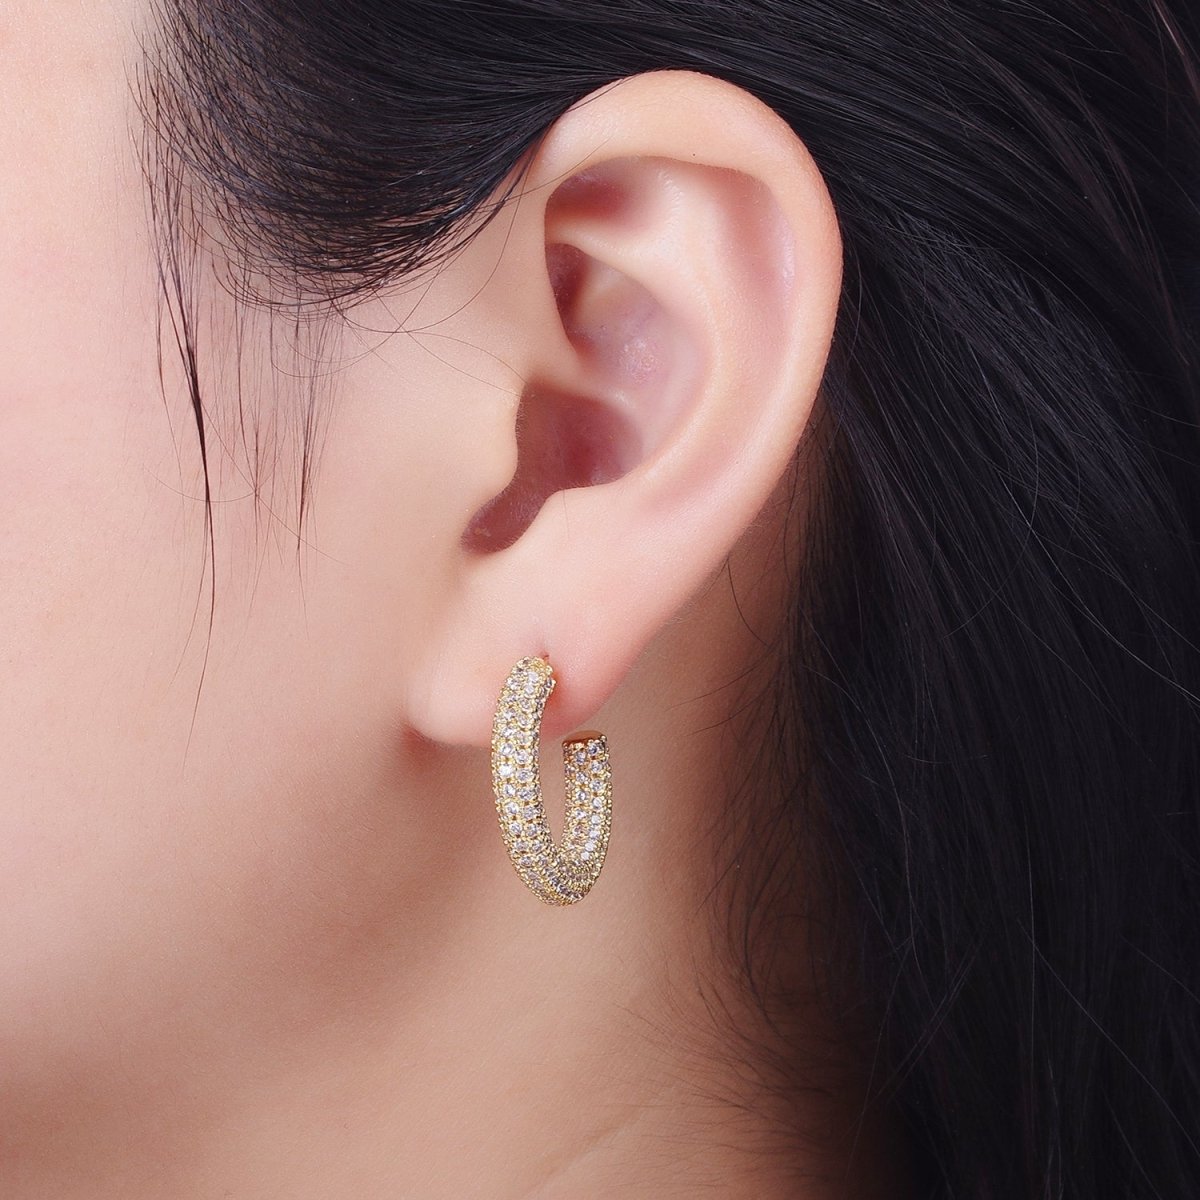 24K Gold Filled 23mm C-Shaped Clear Micro Paved CZ Hoop Stud Earrings | AB003 - DLUXCA